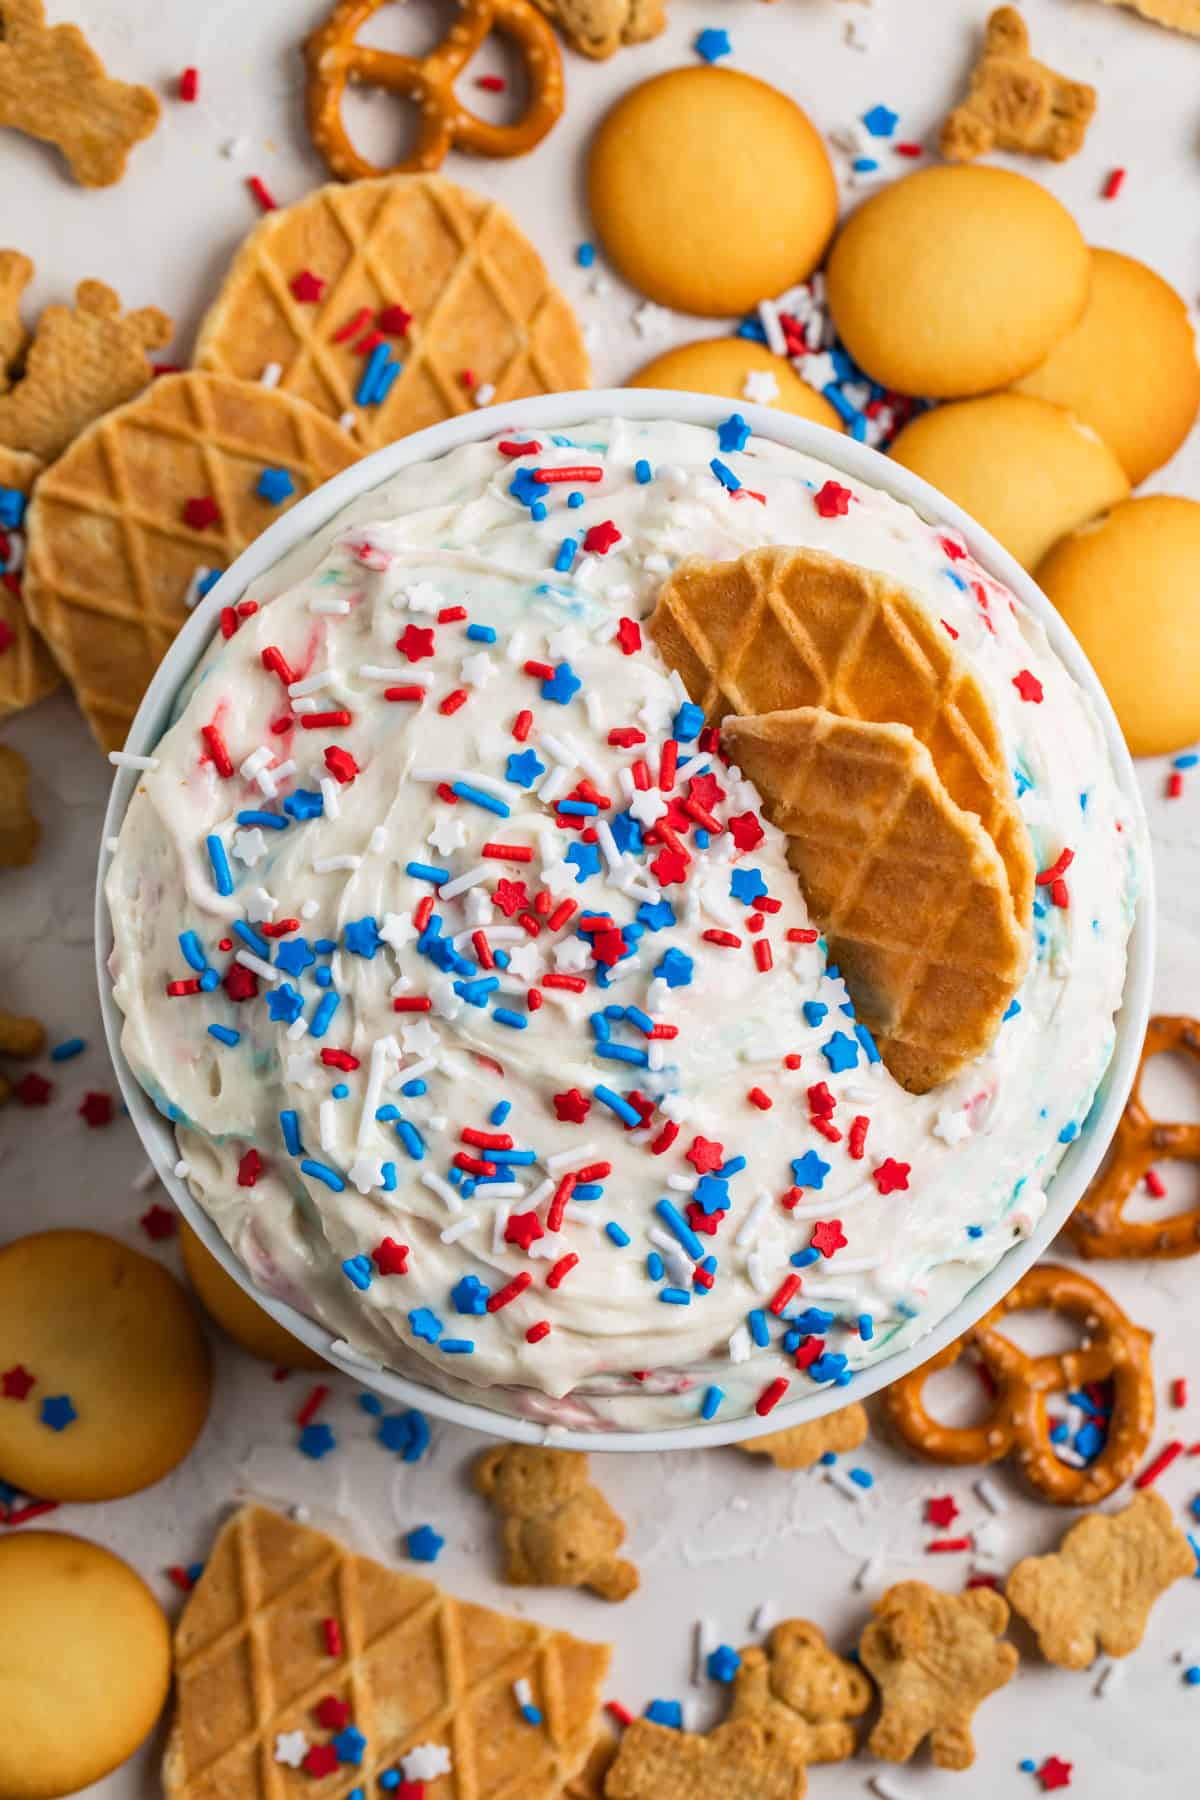 Dunkaroo dip in white bowl with red, white and blue sprinkles on top and cookies and pretzels surrounding.